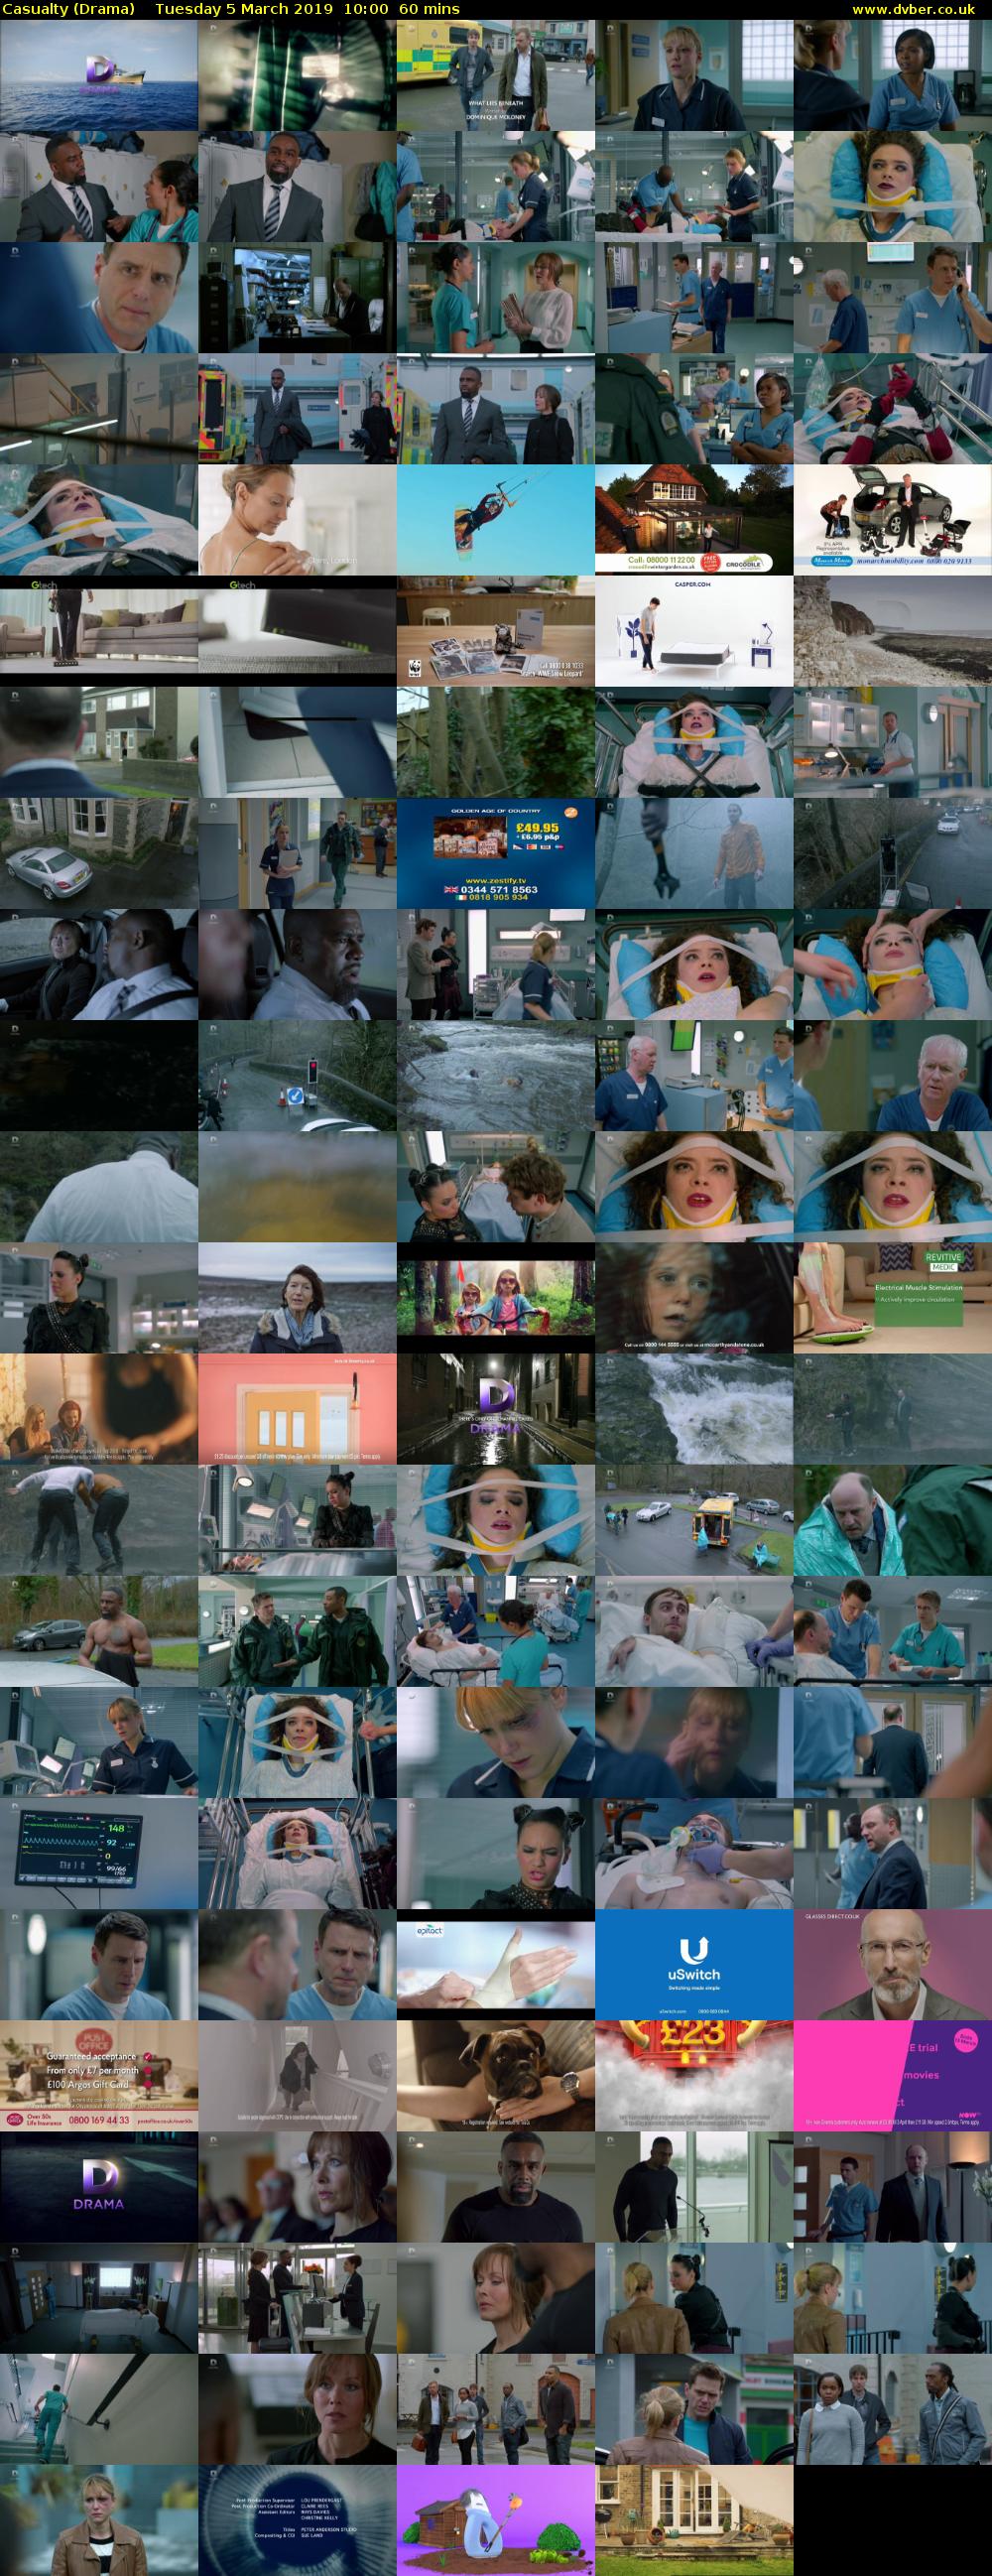 Casualty (Drama) Tuesday 5 March 2019 10:00 - 11:00